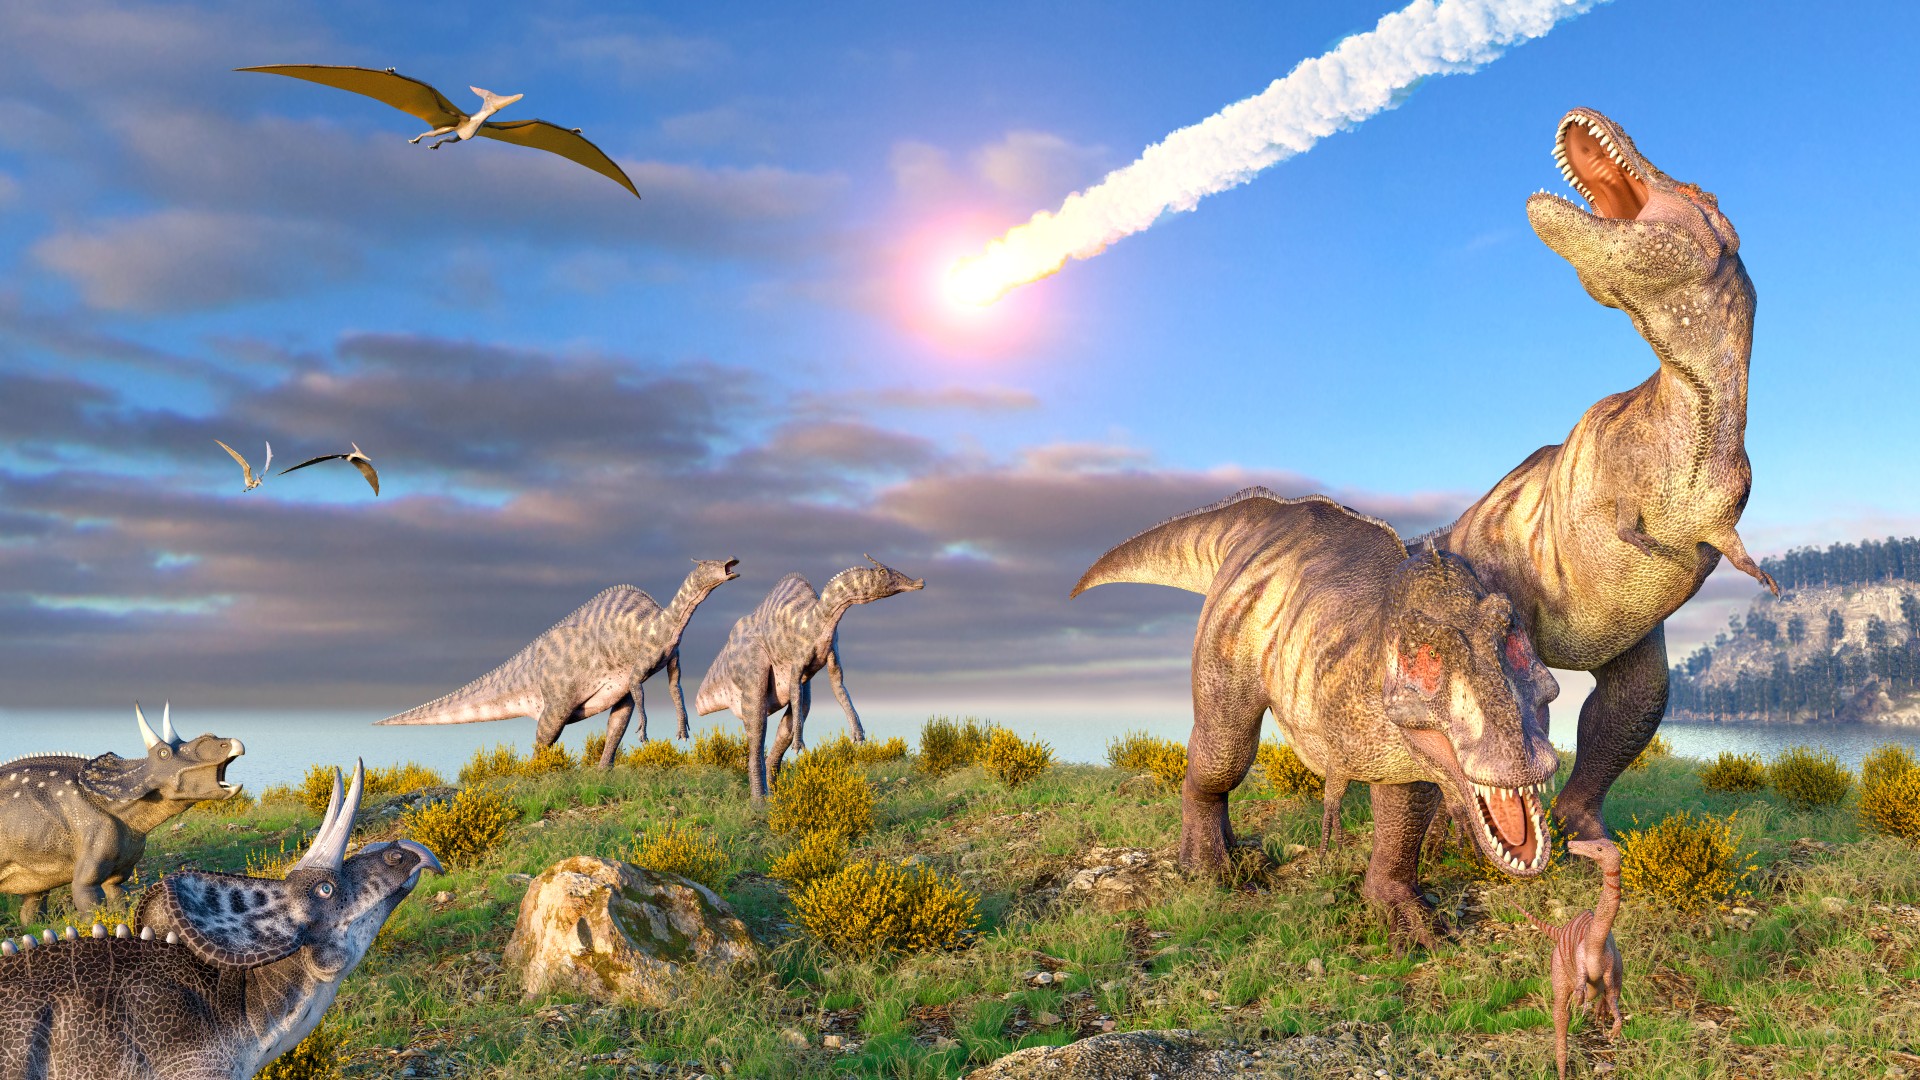 Illustration of the K-Pg extinction event at the end of the Cretaceous Period. A ten-kilometre-wide asteroid or comet is entering the Earth's atmosphere as dinosaurs, including T. rex, look on.